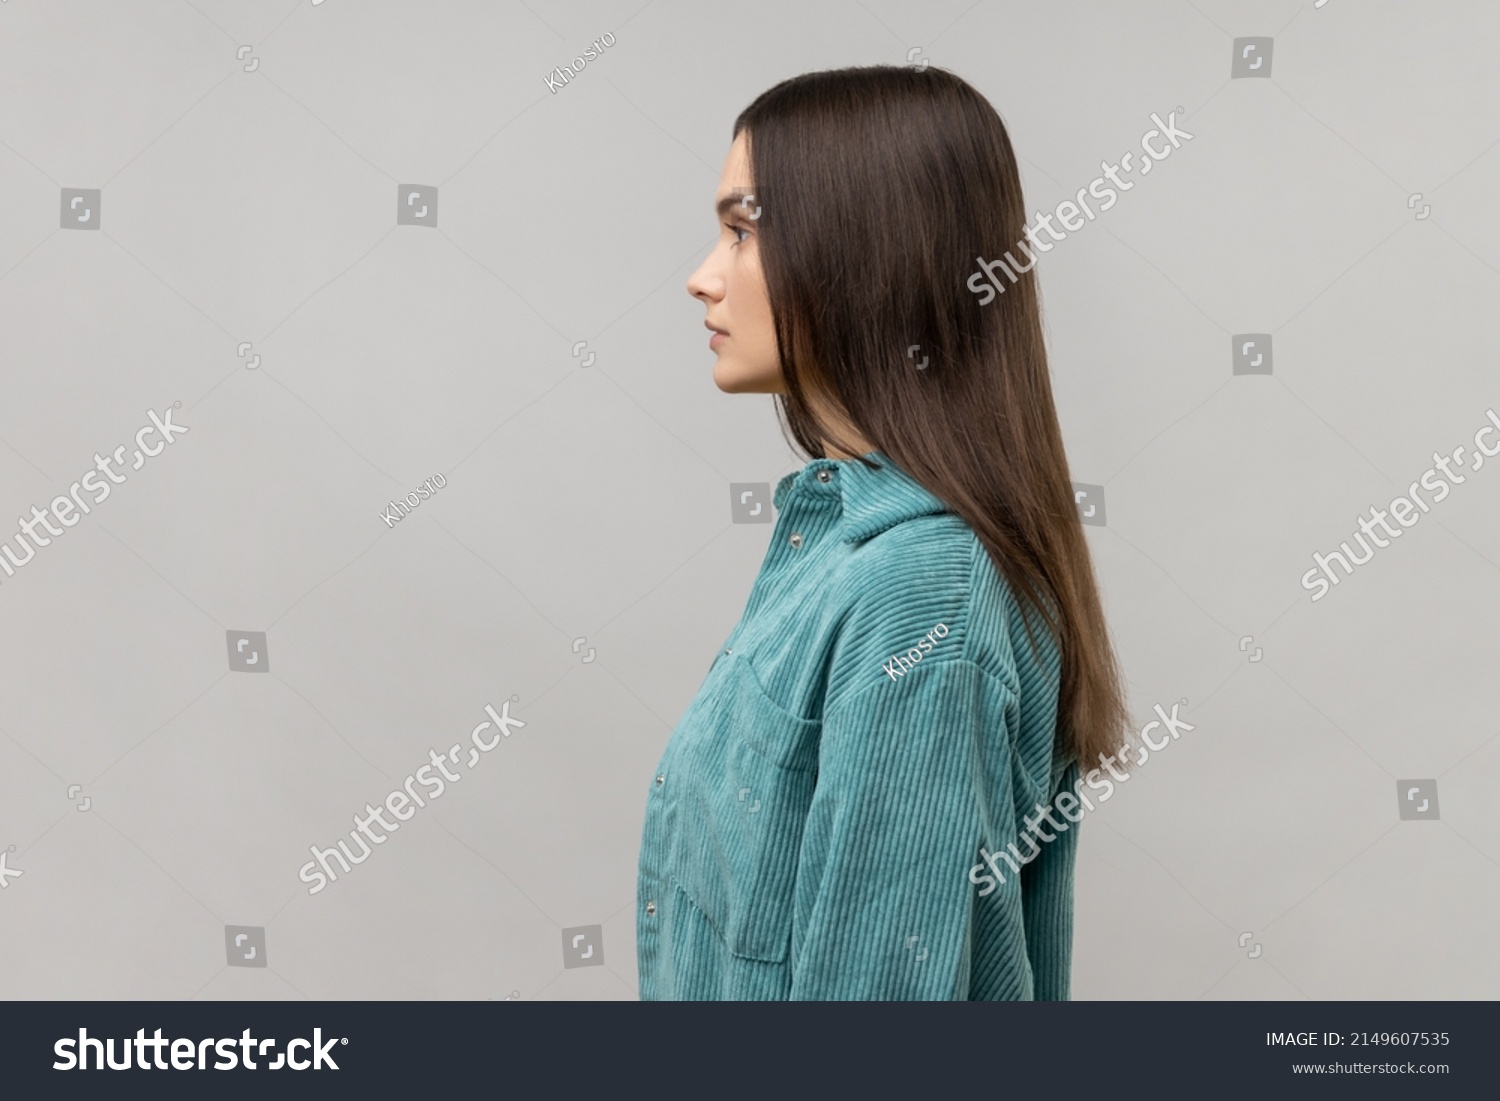 Side view of portrait of strict bossy woman looking ahead, feels confident focused self-assured, expressing seriousness, wearing casual style jacket. Indoor studio shot isolated on gray background. #2149607535